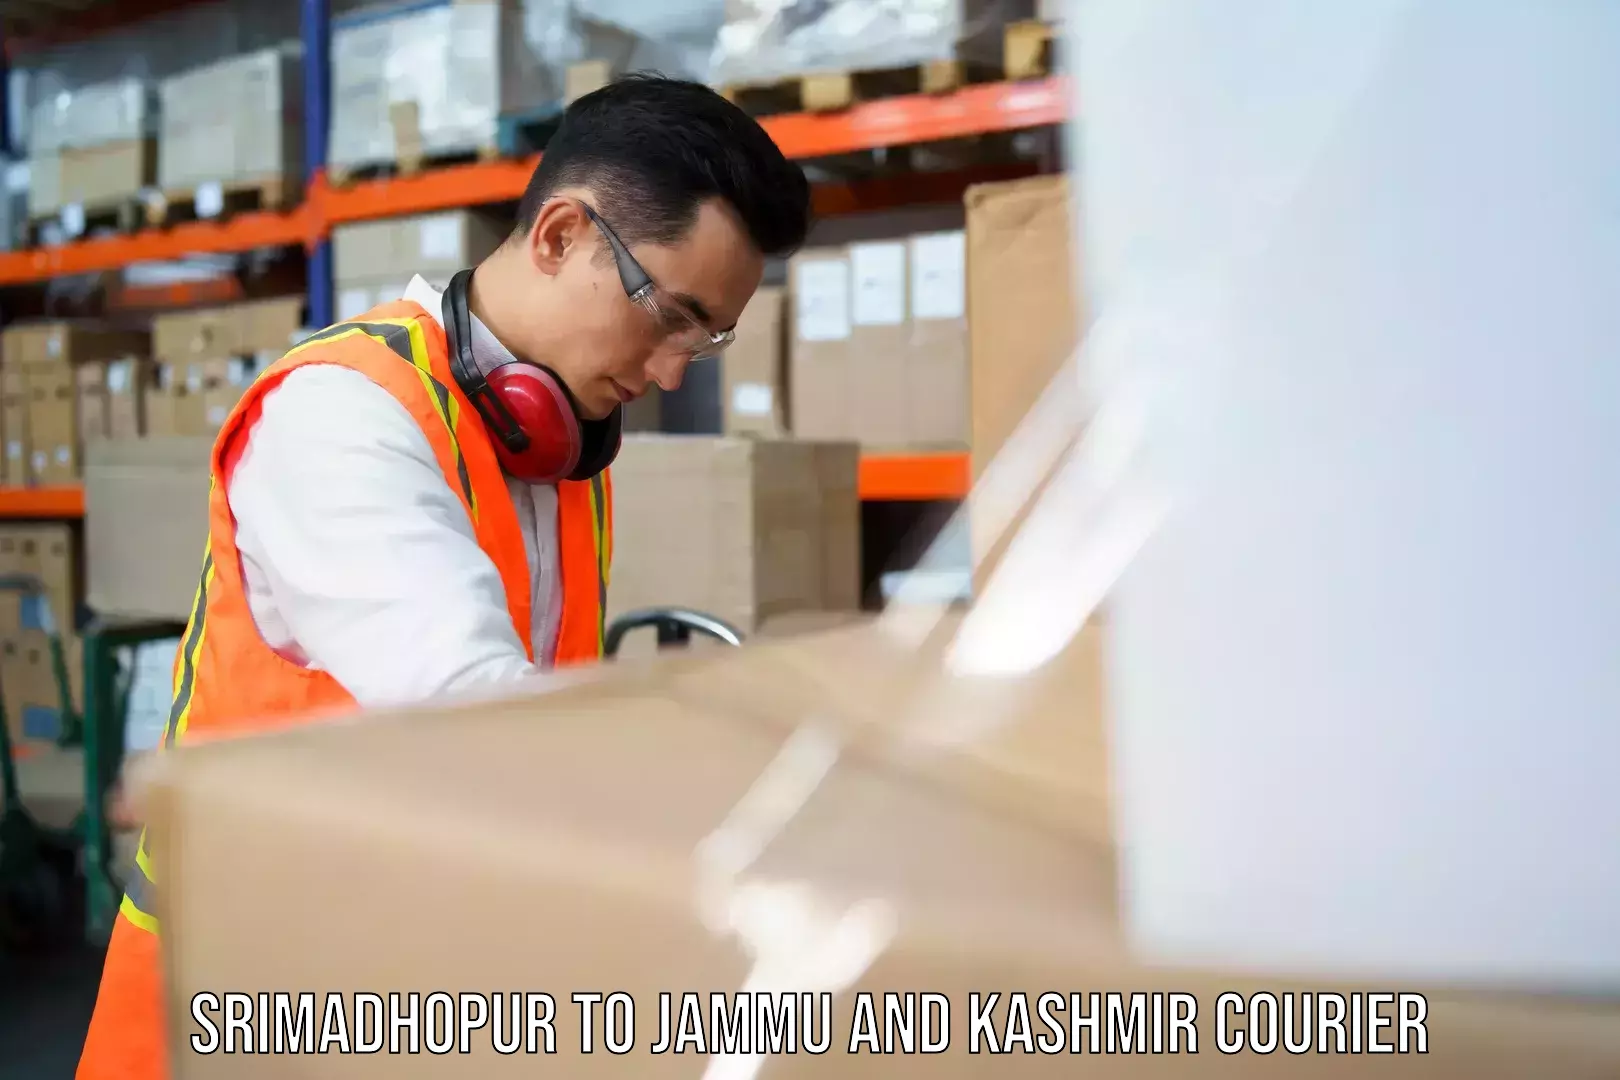 Multi-national courier services Srimadhopur to Bhaderwah